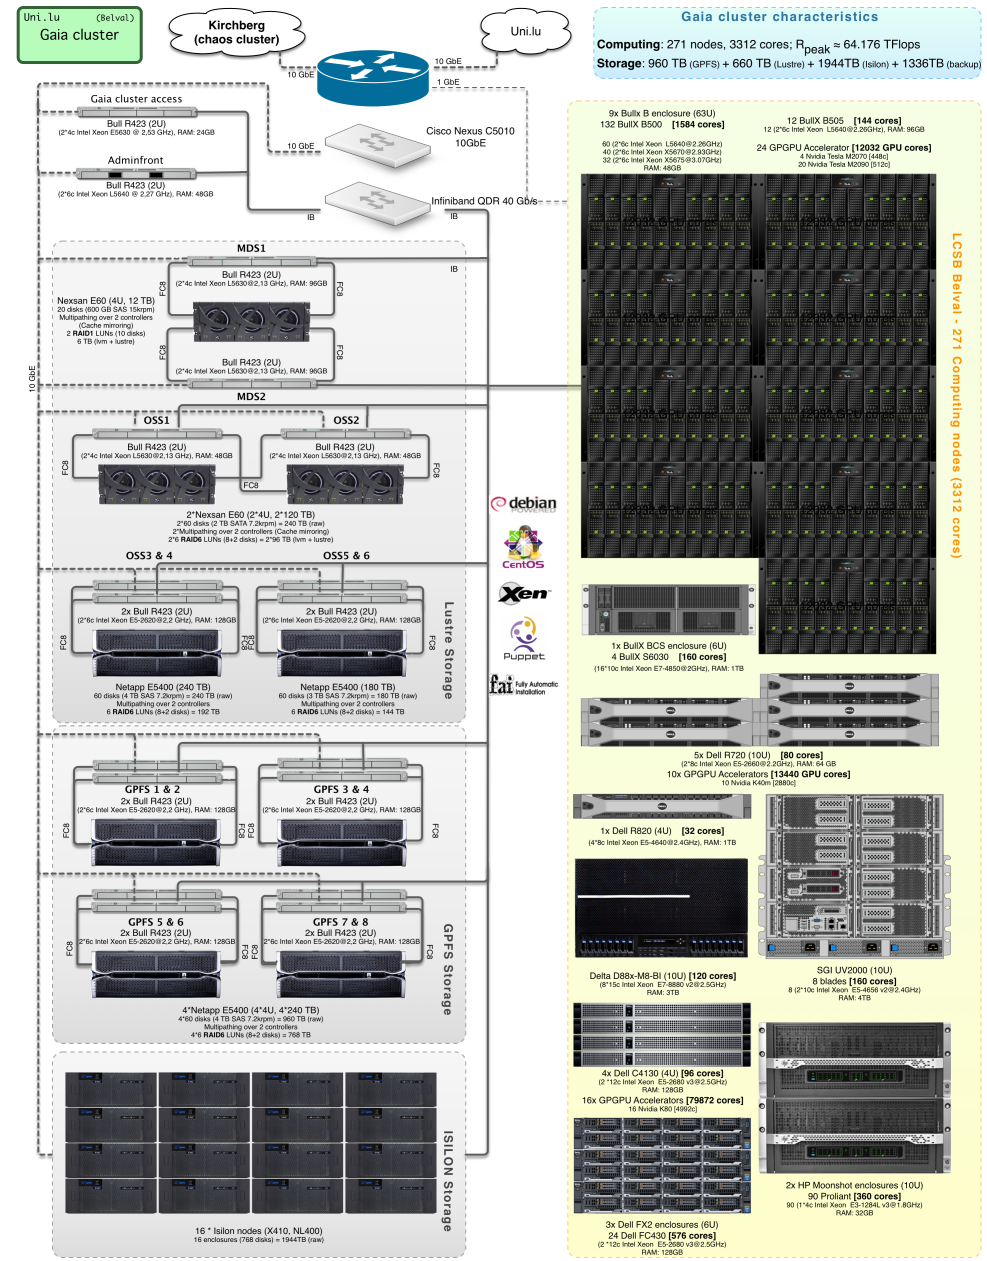 Overview of the Gaia cluster